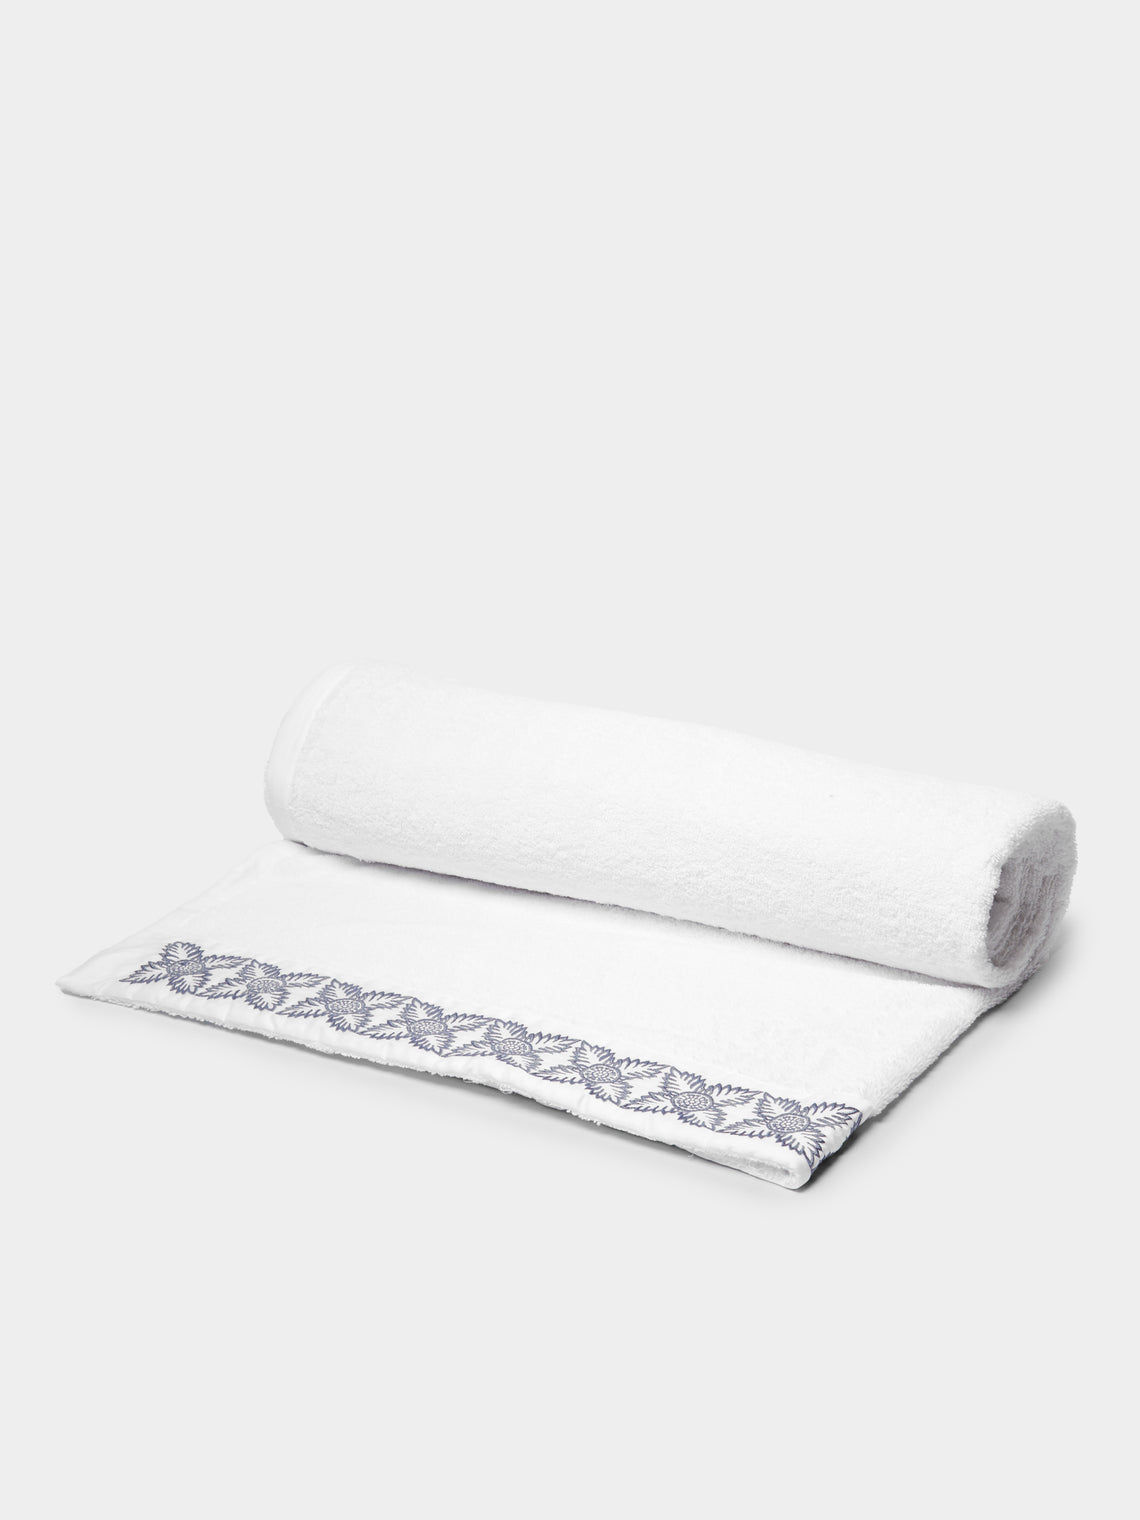 Loretta Caponi - Foliage Hand-Embroidered Cotton Towel Collection -  - ABASK